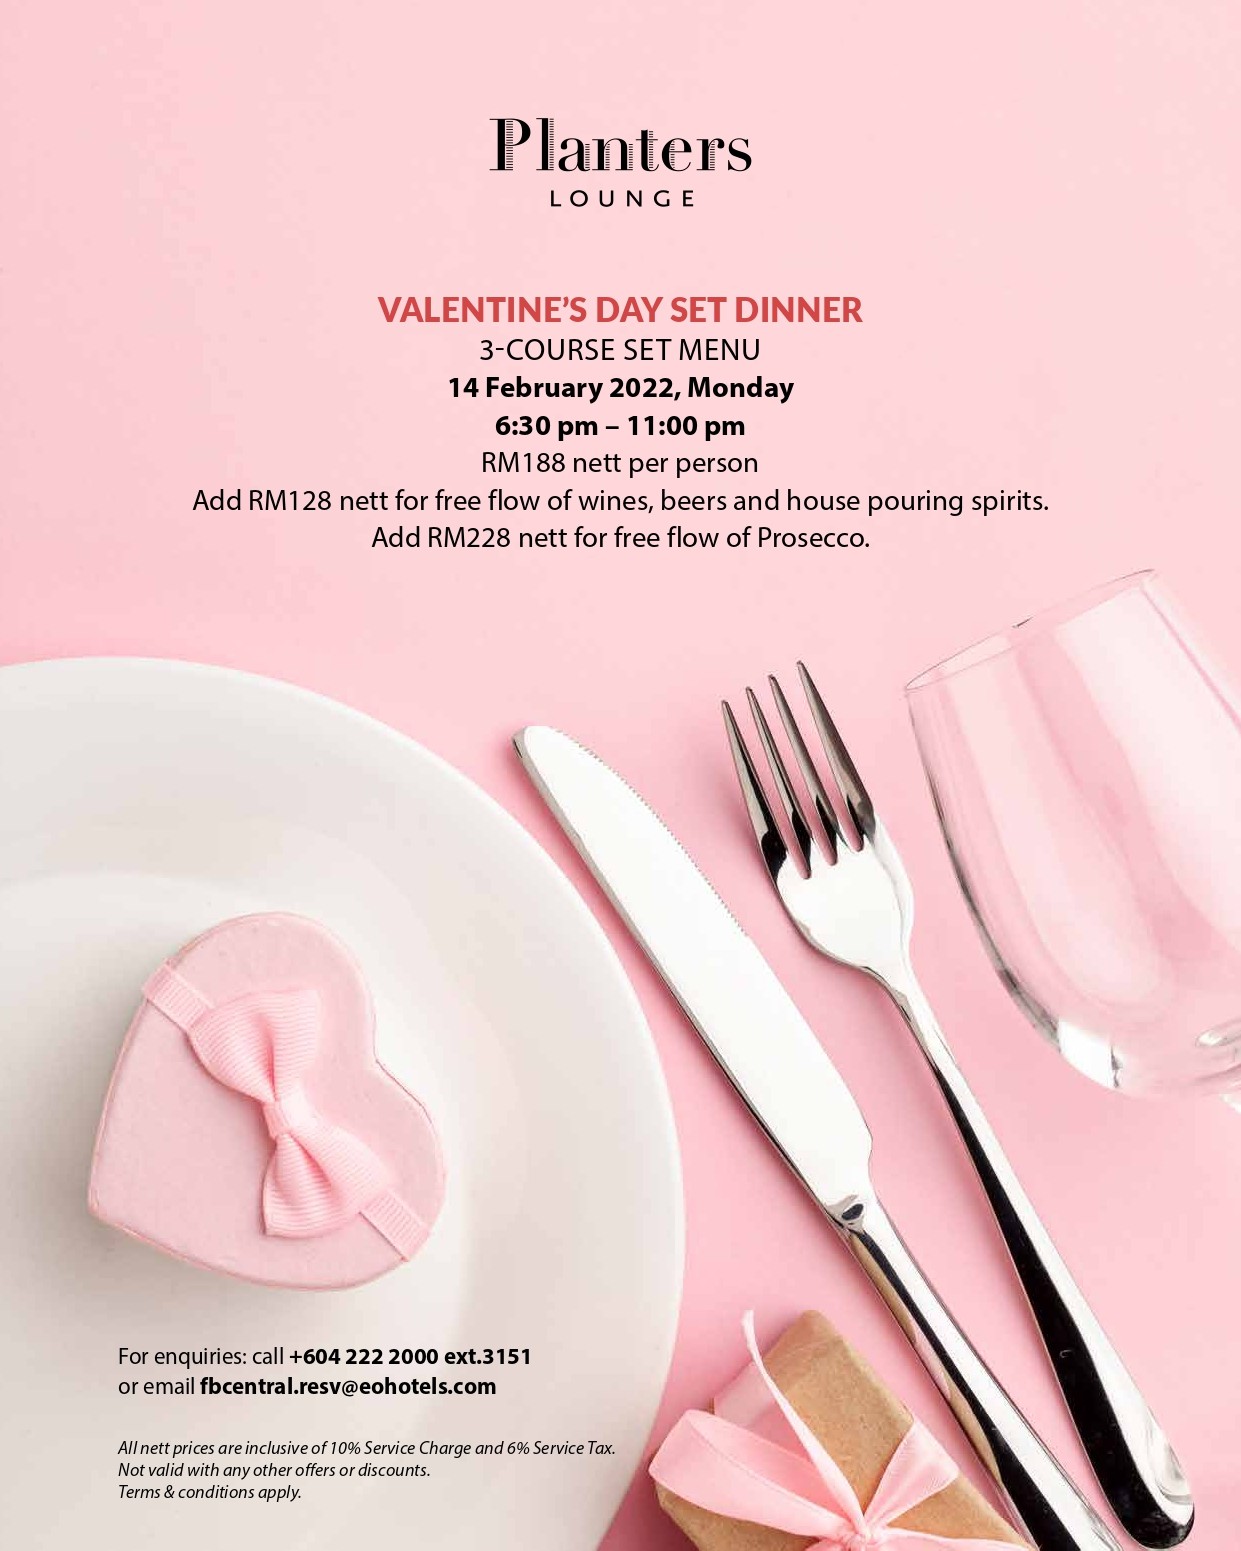 Planter's Lounge Valentine's Day by Eastern & Oriental Hotel